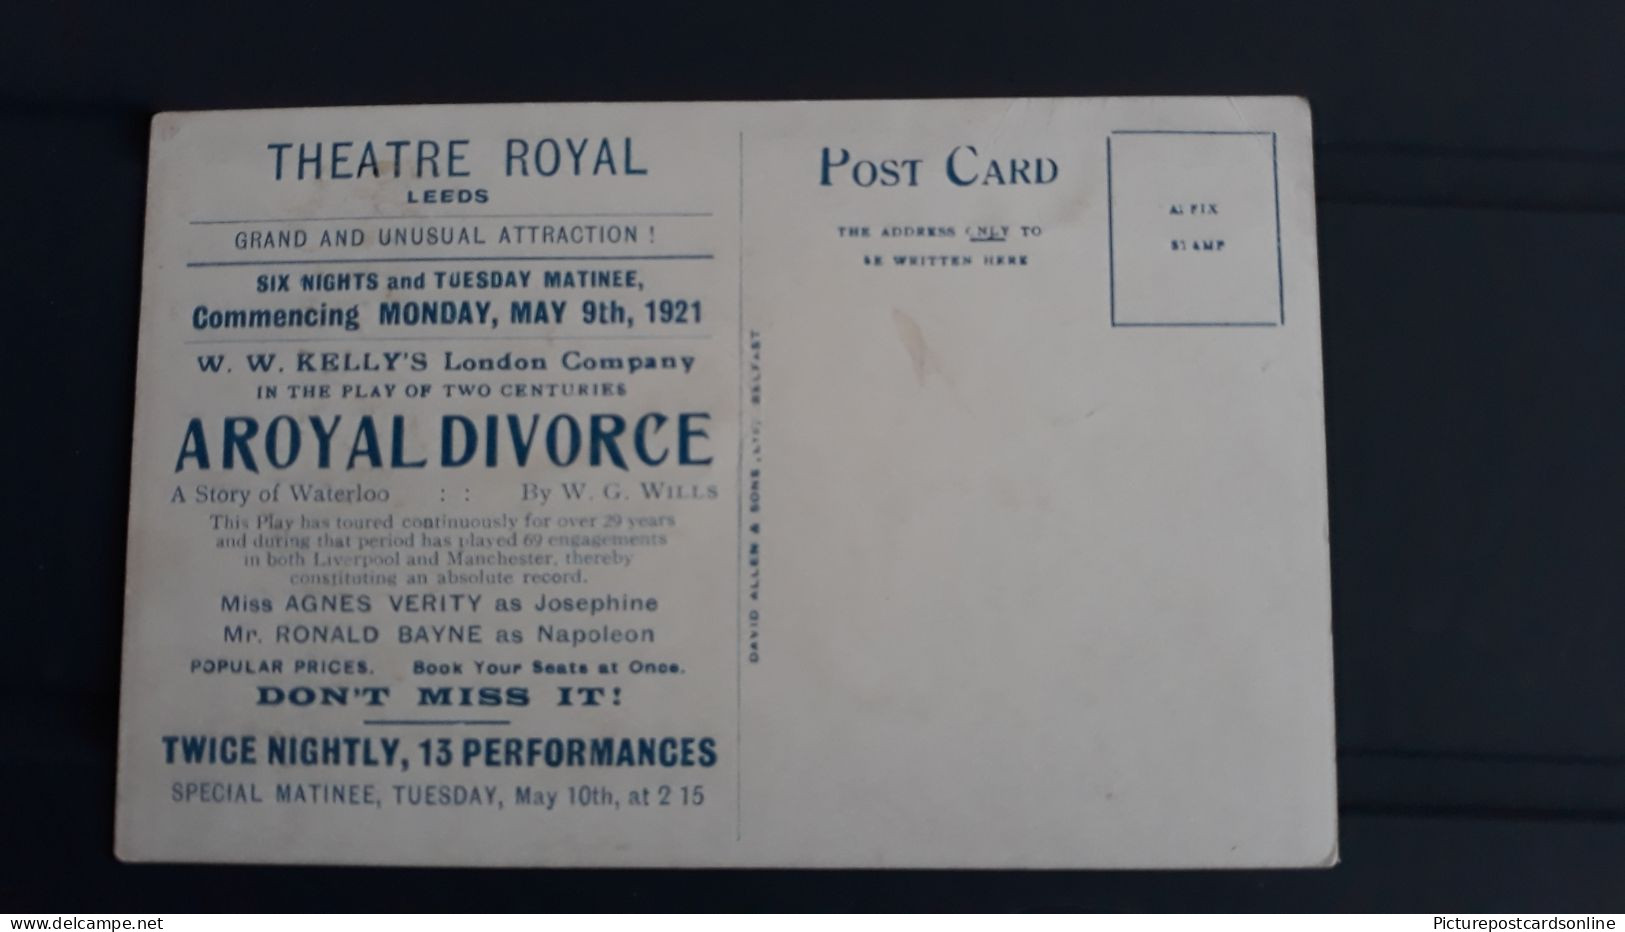 THEATRE ROYAL LEEDS OLD COLOUR ADVERTISING POSTCARD YORKSHIRE A ROYAL DIVORCE STORY OF WATERLOO BY W.G. WILLS - Leeds